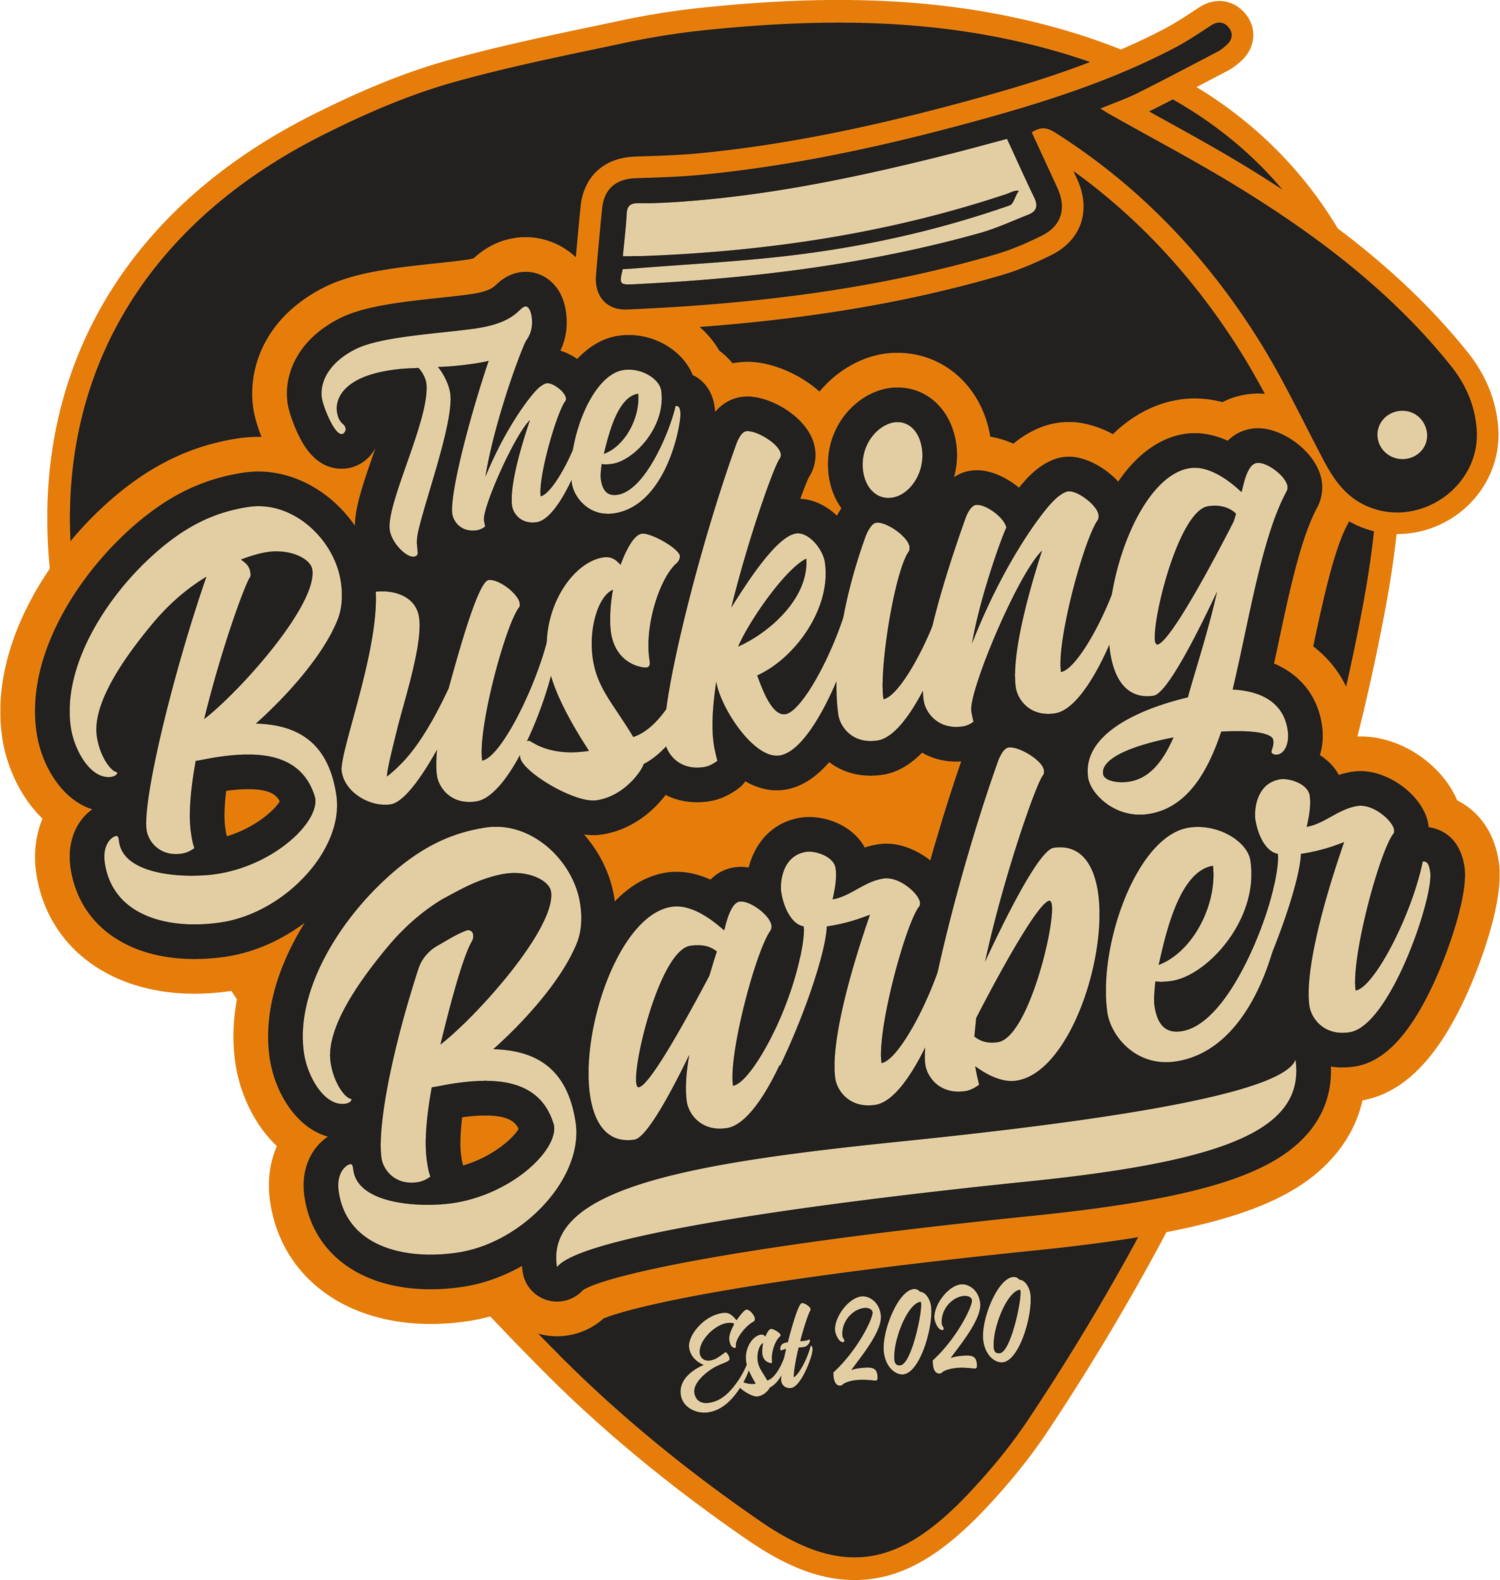 The Busking Barber 